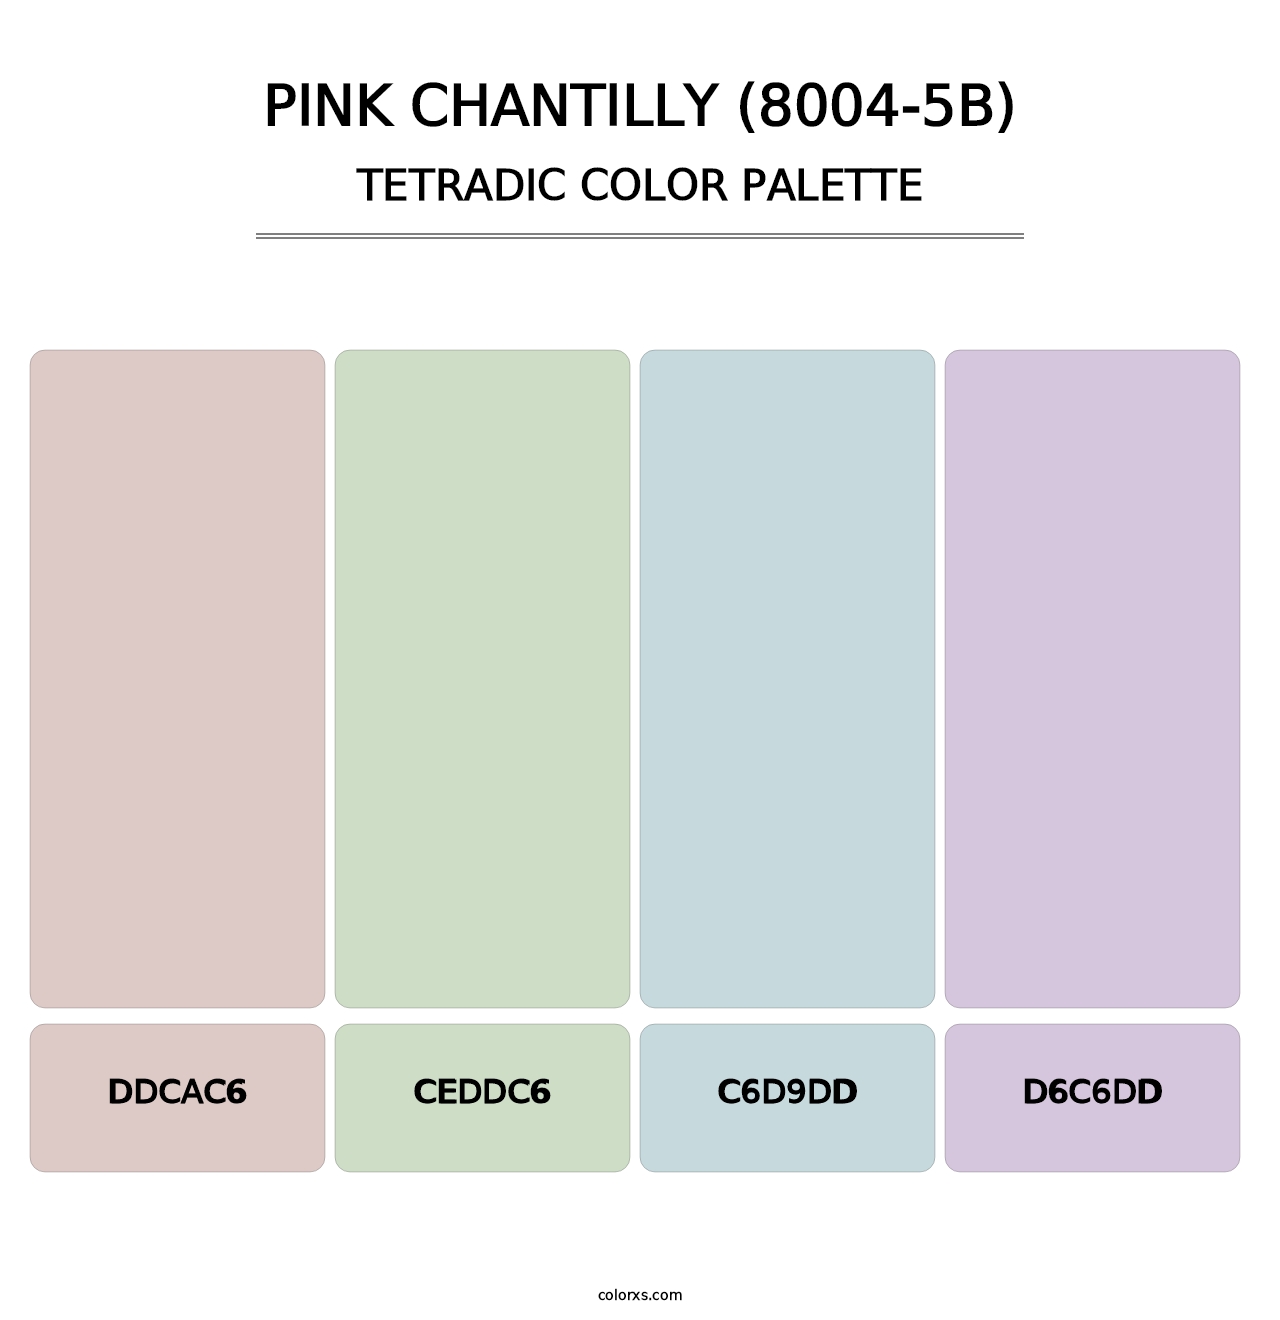 Pink Chantilly (8004-5B) - Tetradic Color Palette